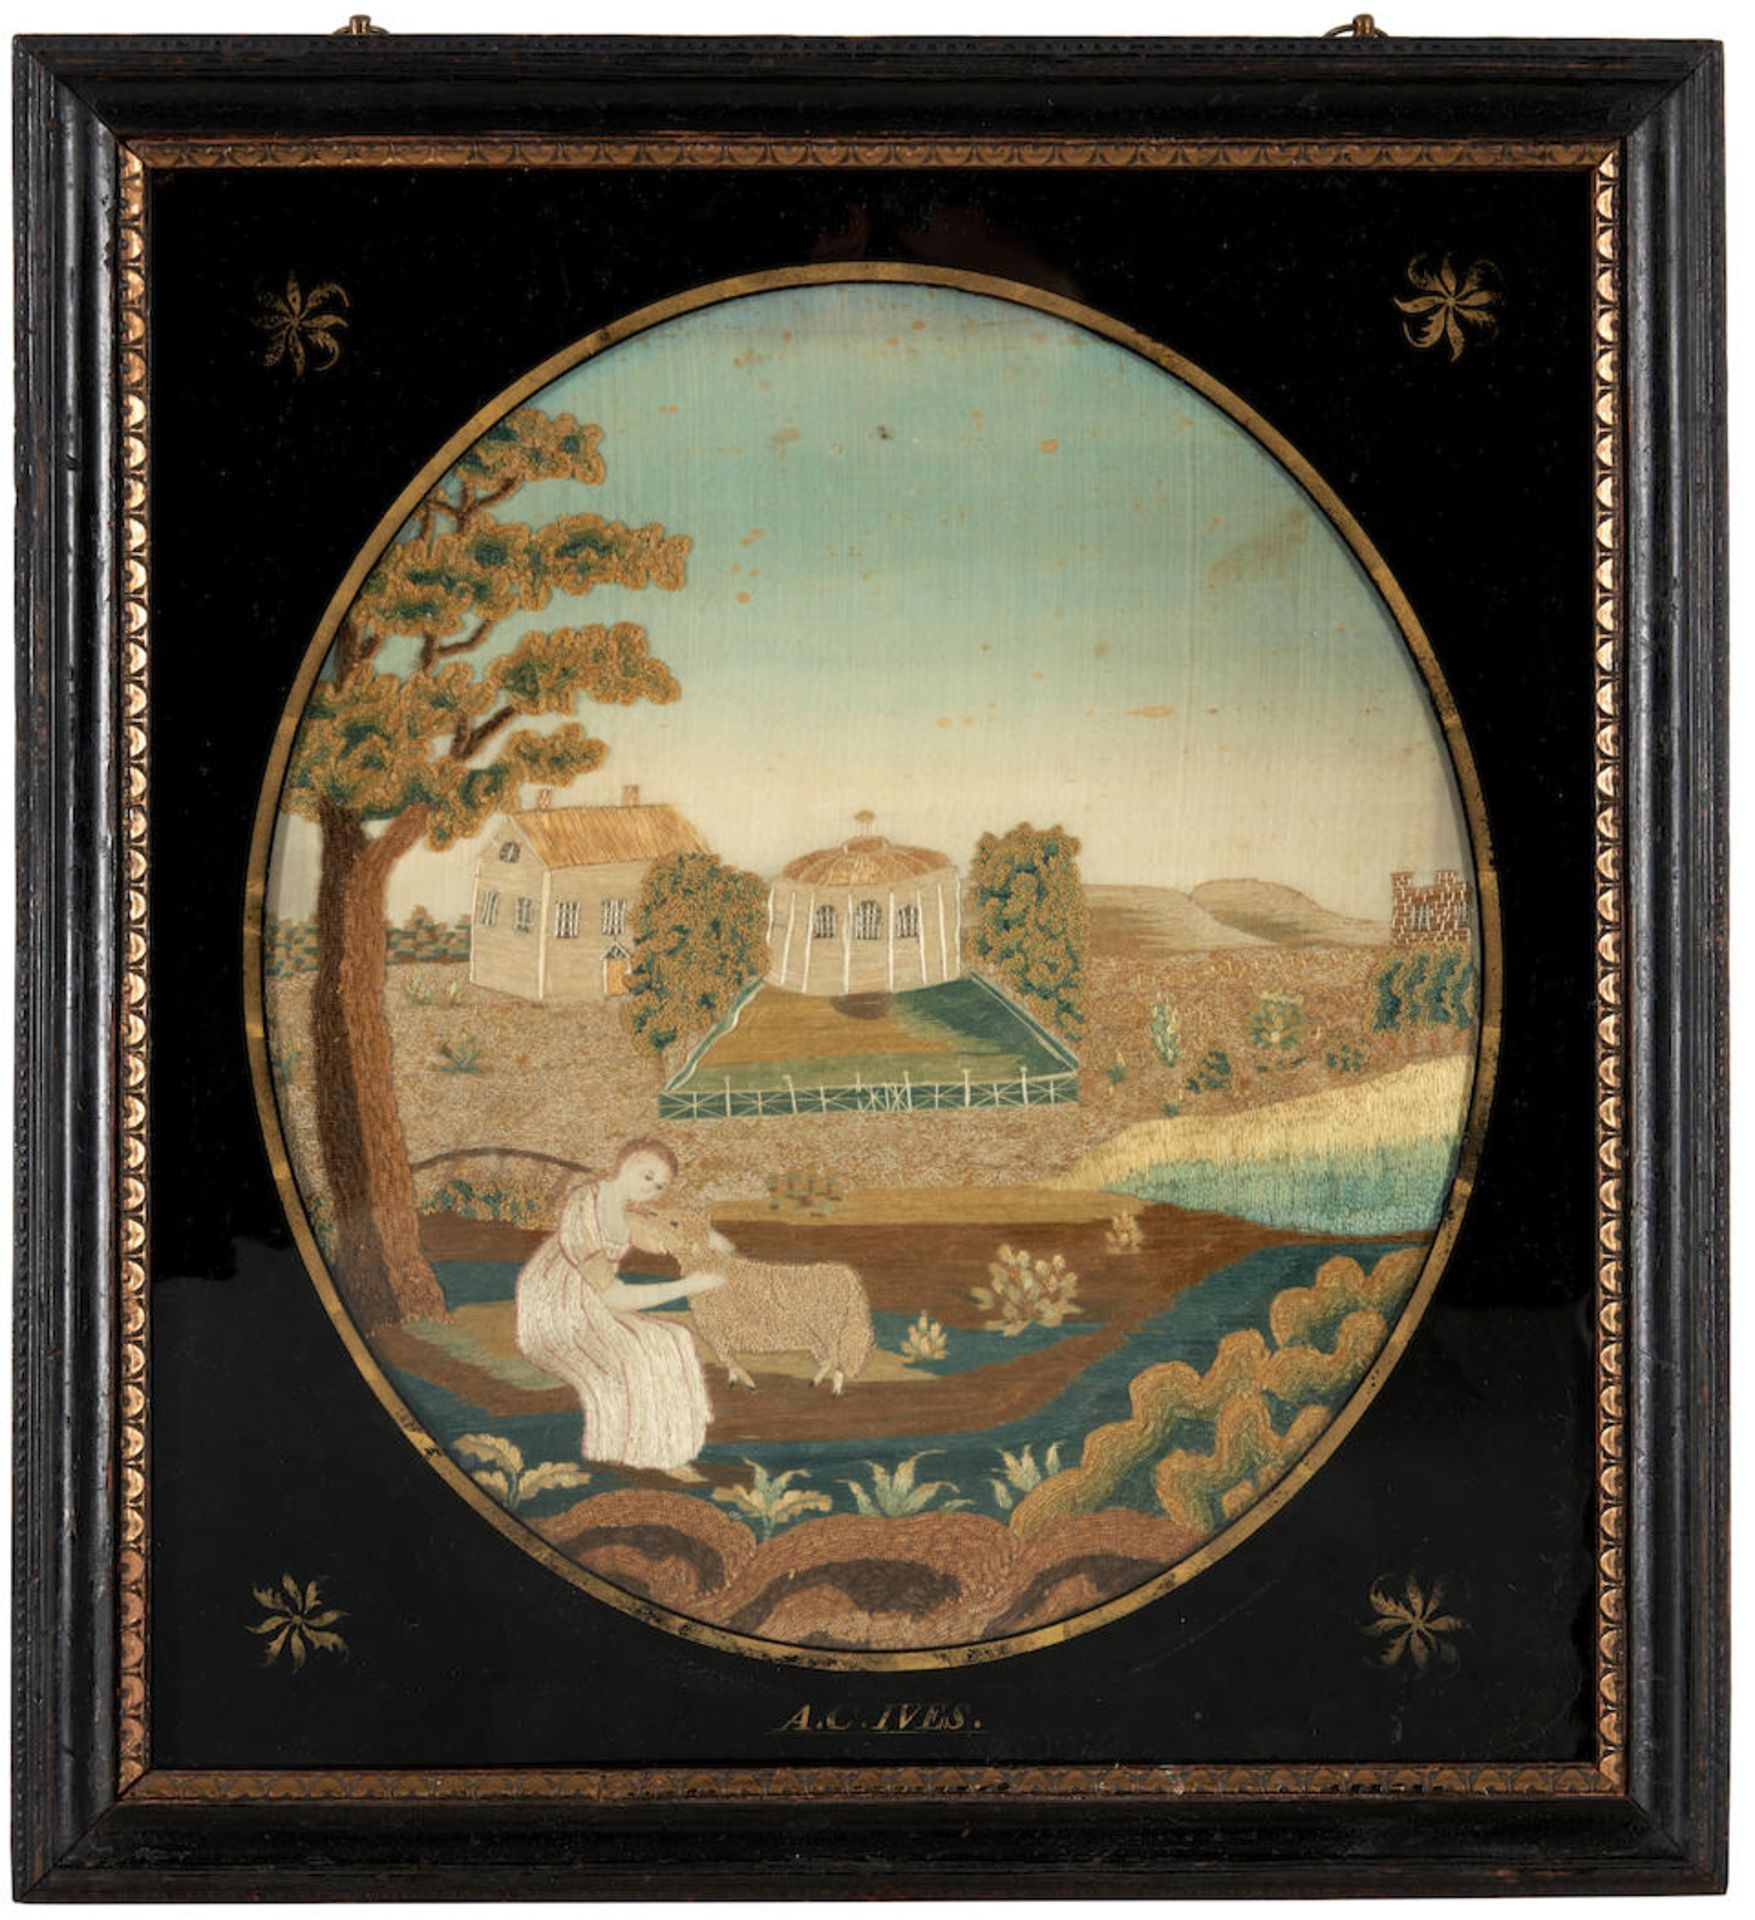 Watercolor and Silk Embroidery Picture, possibly Alma Cornelia Ives (1793-1856), Miss Royse's Sc...